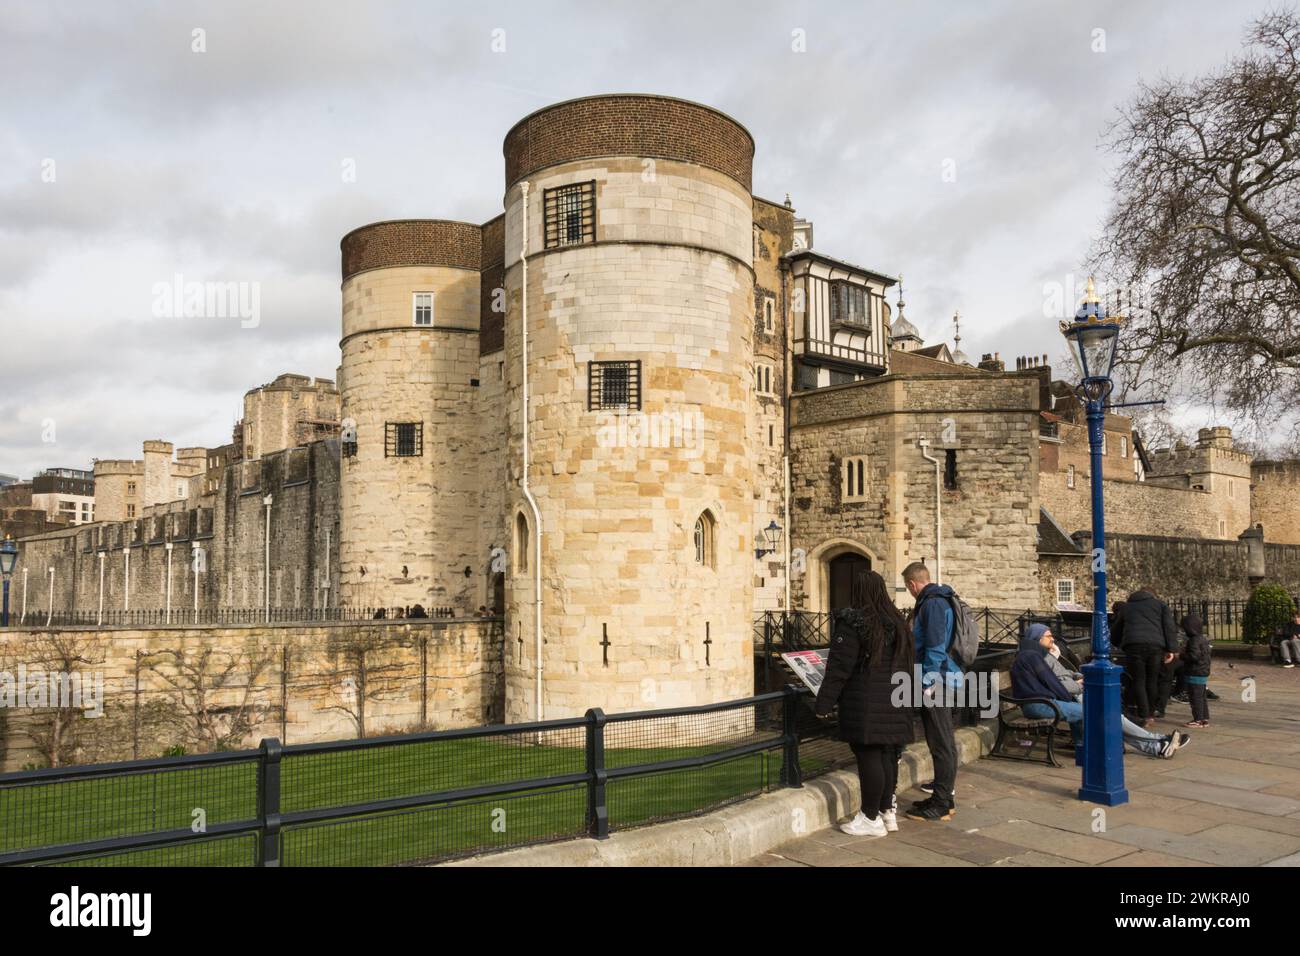 Tourists exploring Byward Tower and the moat in front of the Tower of London, City of London, England, U.K. Stock Photo